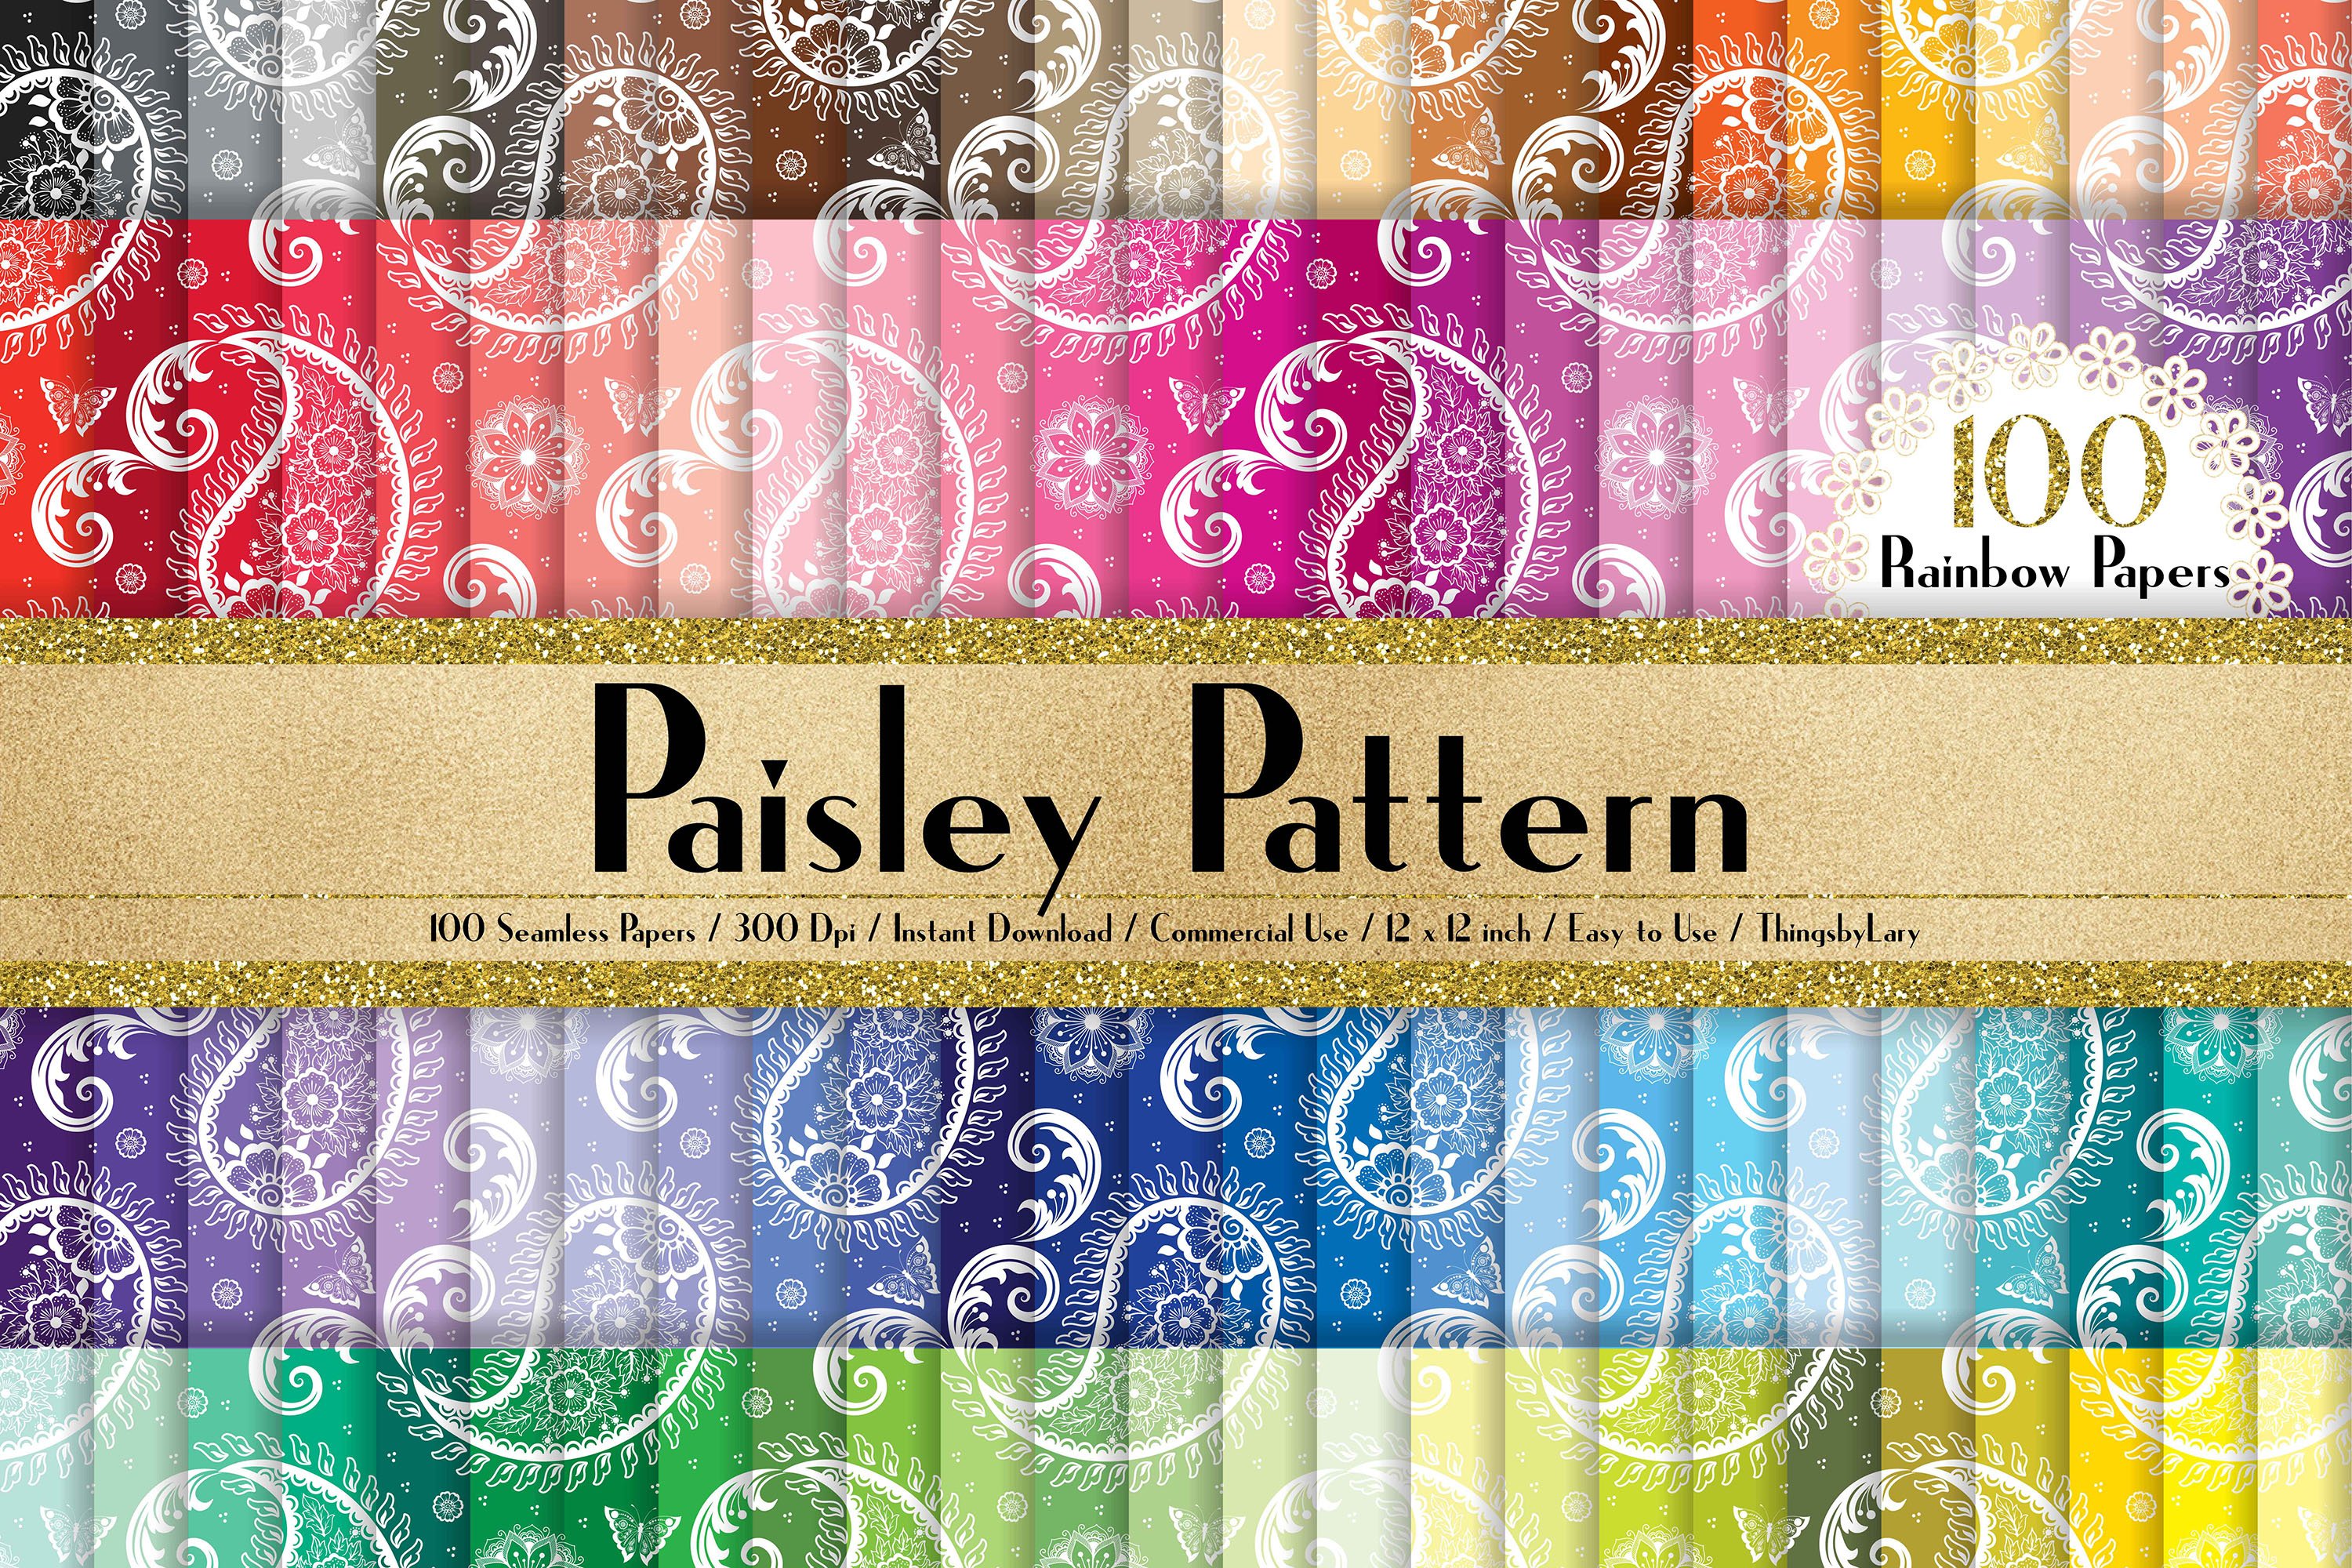 100 Rainbow Papers Paisley Pattern.